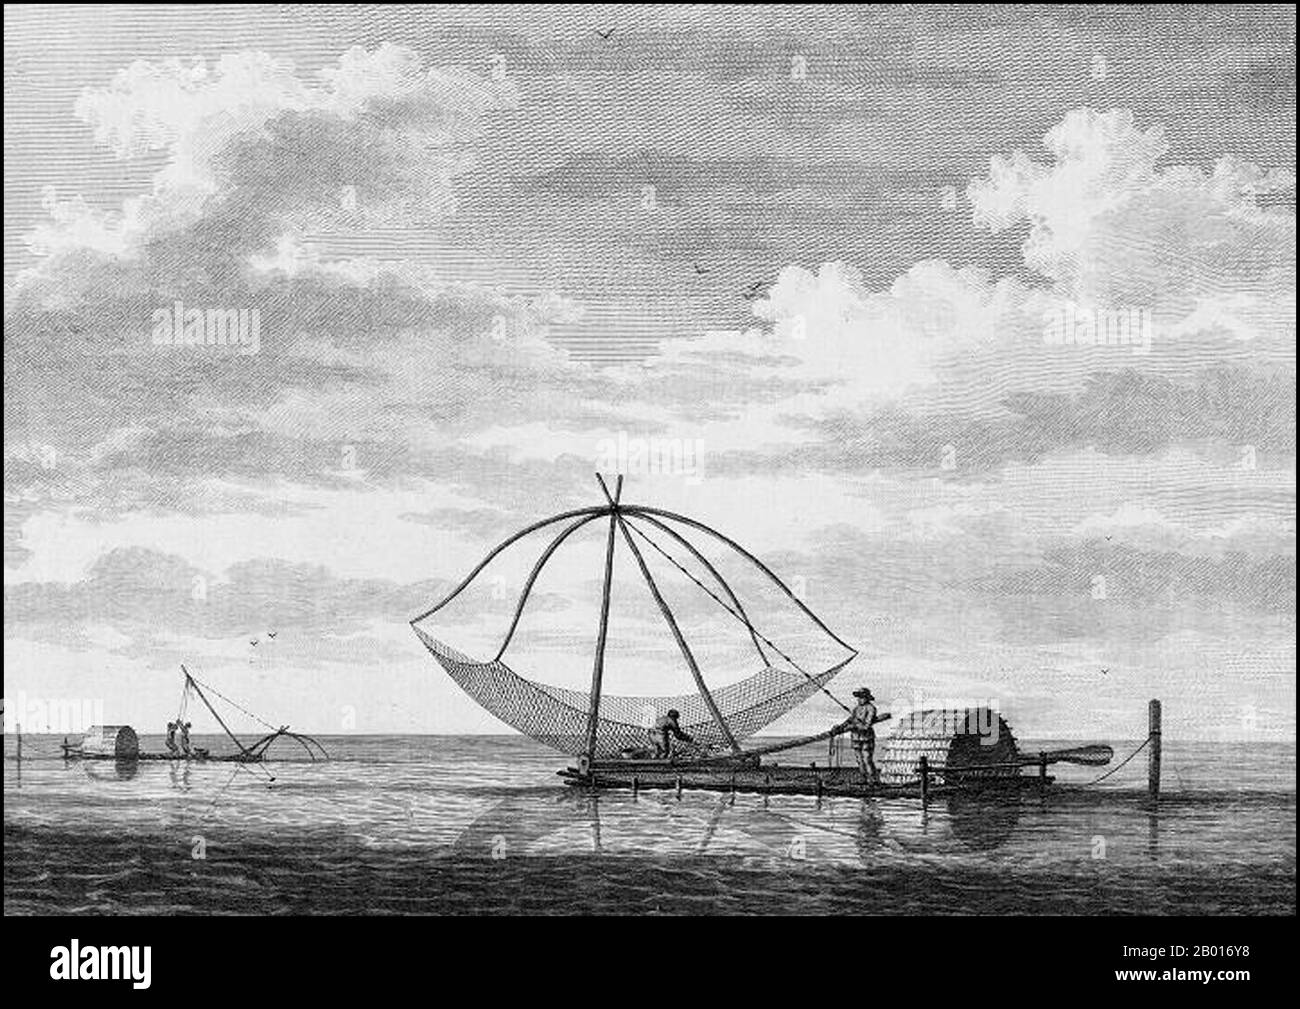 Philippines: Fishing with Chinese-style nets off Manila. Engraving from 'Atlas du Voyage de La Pérouse' by Francois Michel Blondela (1761-1788), 1792.  Jean-François de Galaup, Comte de La Pérouse (1741-1788) was a French explorer and naval officer. In 1785, the King of France commissioned La Perouse to head an expedition to explore the Pacific Ocean, to investigate whaling and fur prospects, and to establish French claims in this area. La Pérouse had admired the explorer James Cook, and wanted to continue his work. Stock Photo